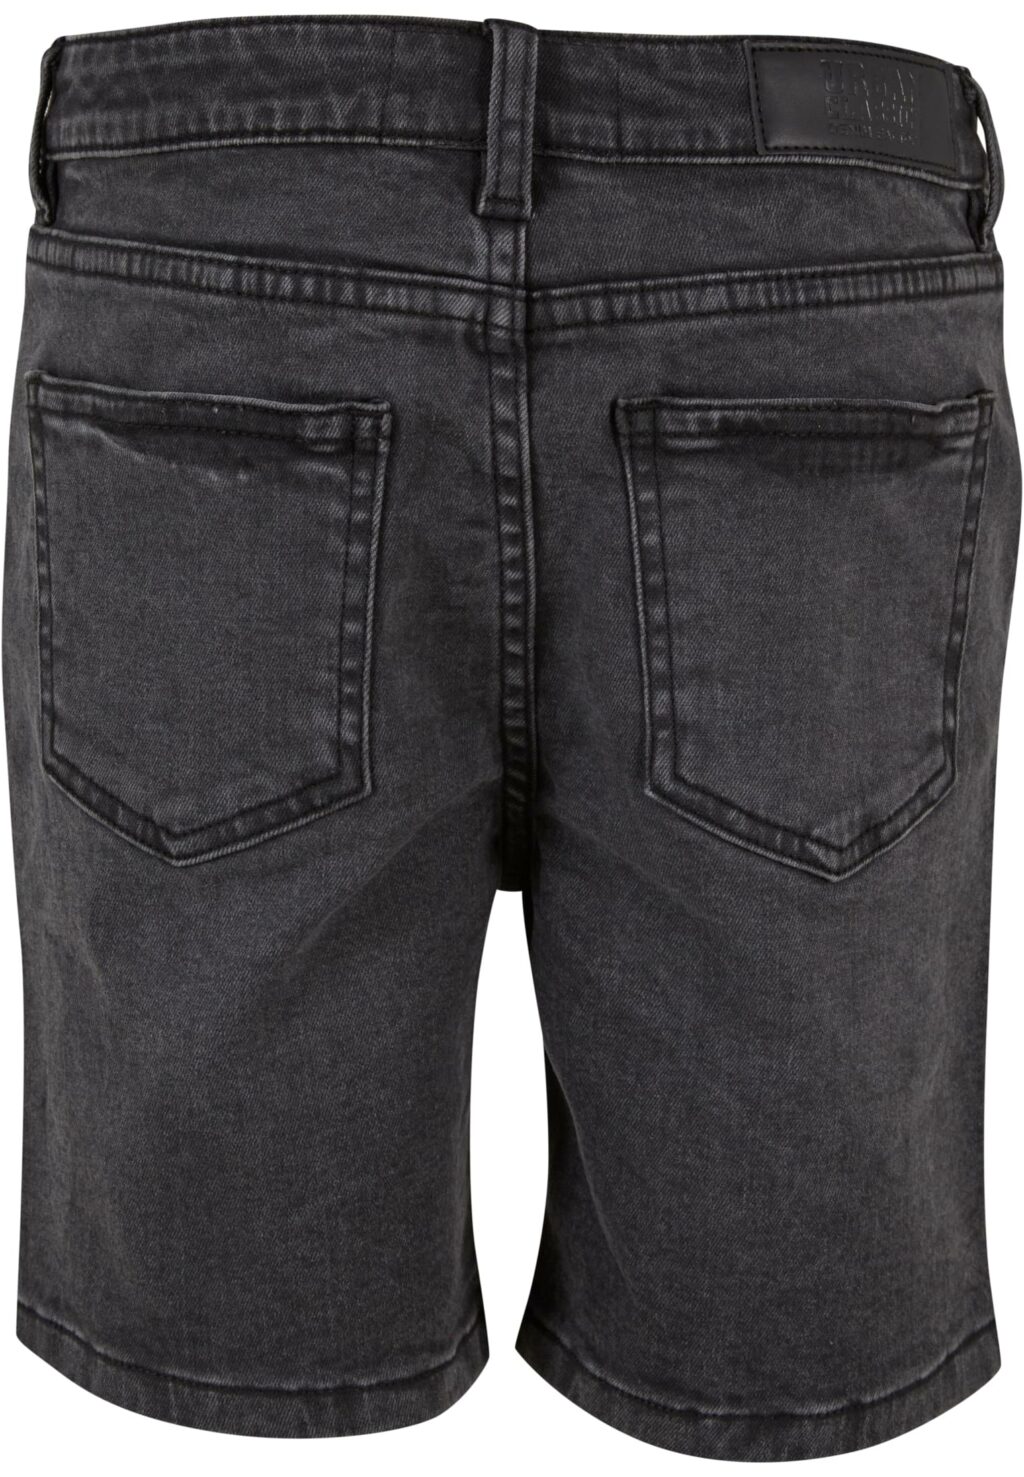 Boys Relaxed Fit Jeans Shorts black washed UCK4156